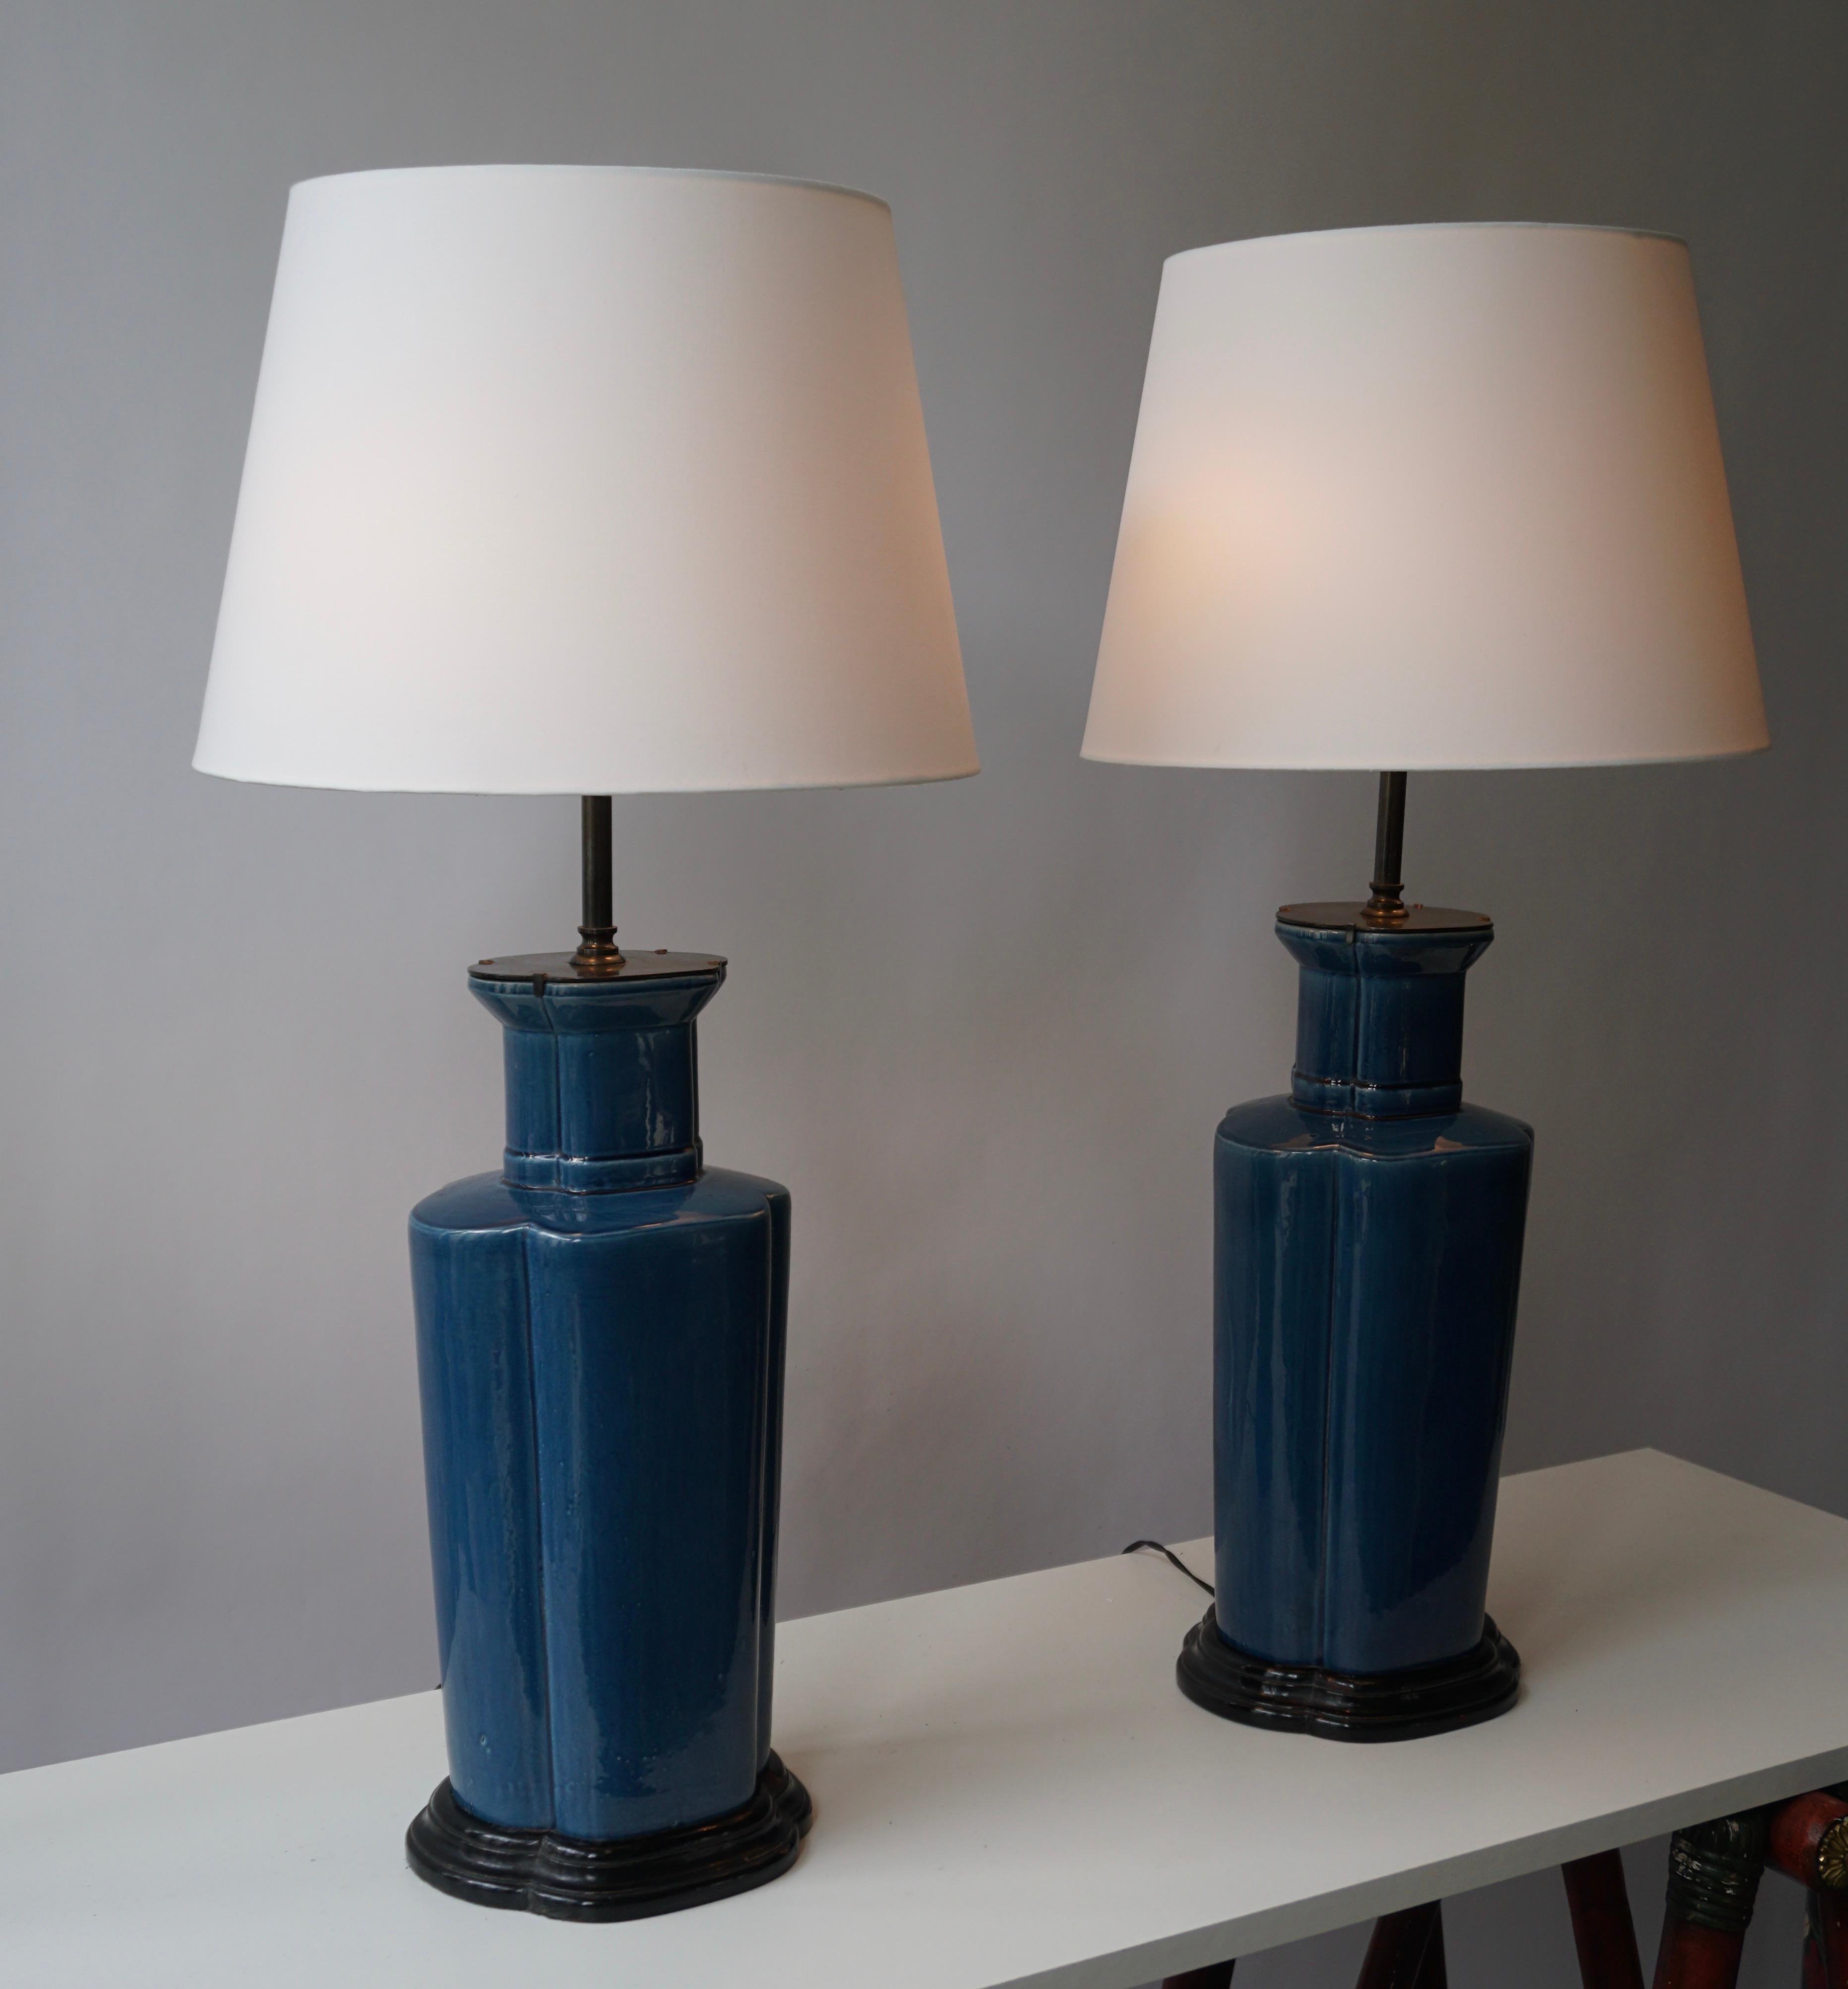 Two table lamps. 

Height base 39 cm. Width 17 cm. Depth 16 cm.
Total height 70 cm.

Diameter shade 33 cm.

Shades shown are for demonstration purposes only.